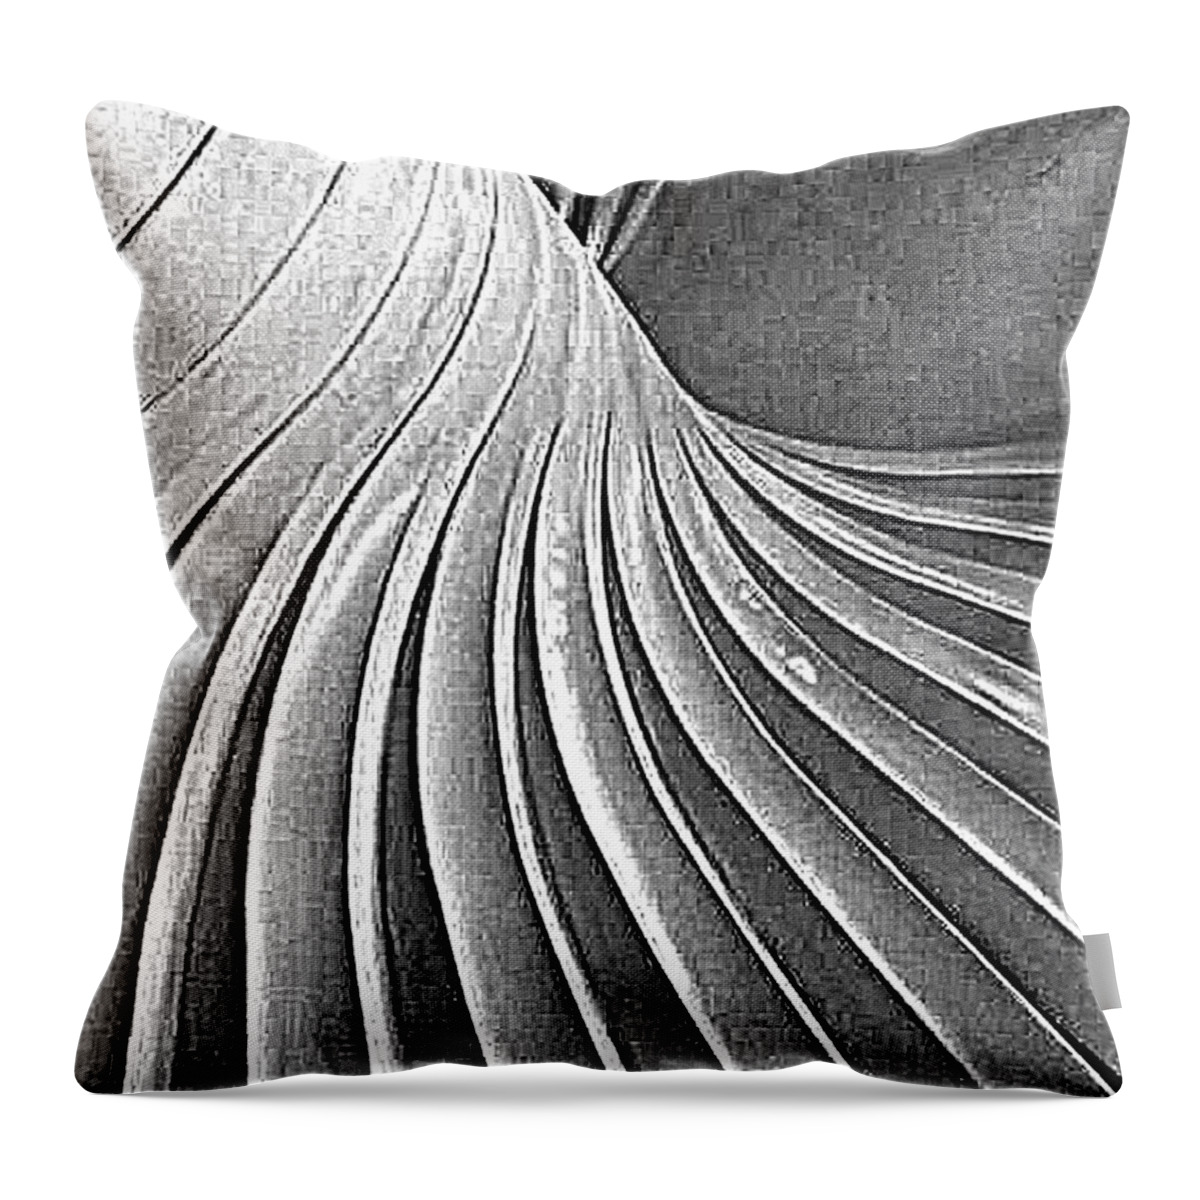 Abstract Throw Pillow featuring the photograph Abstract - Spiral Grain by Richard Reeve